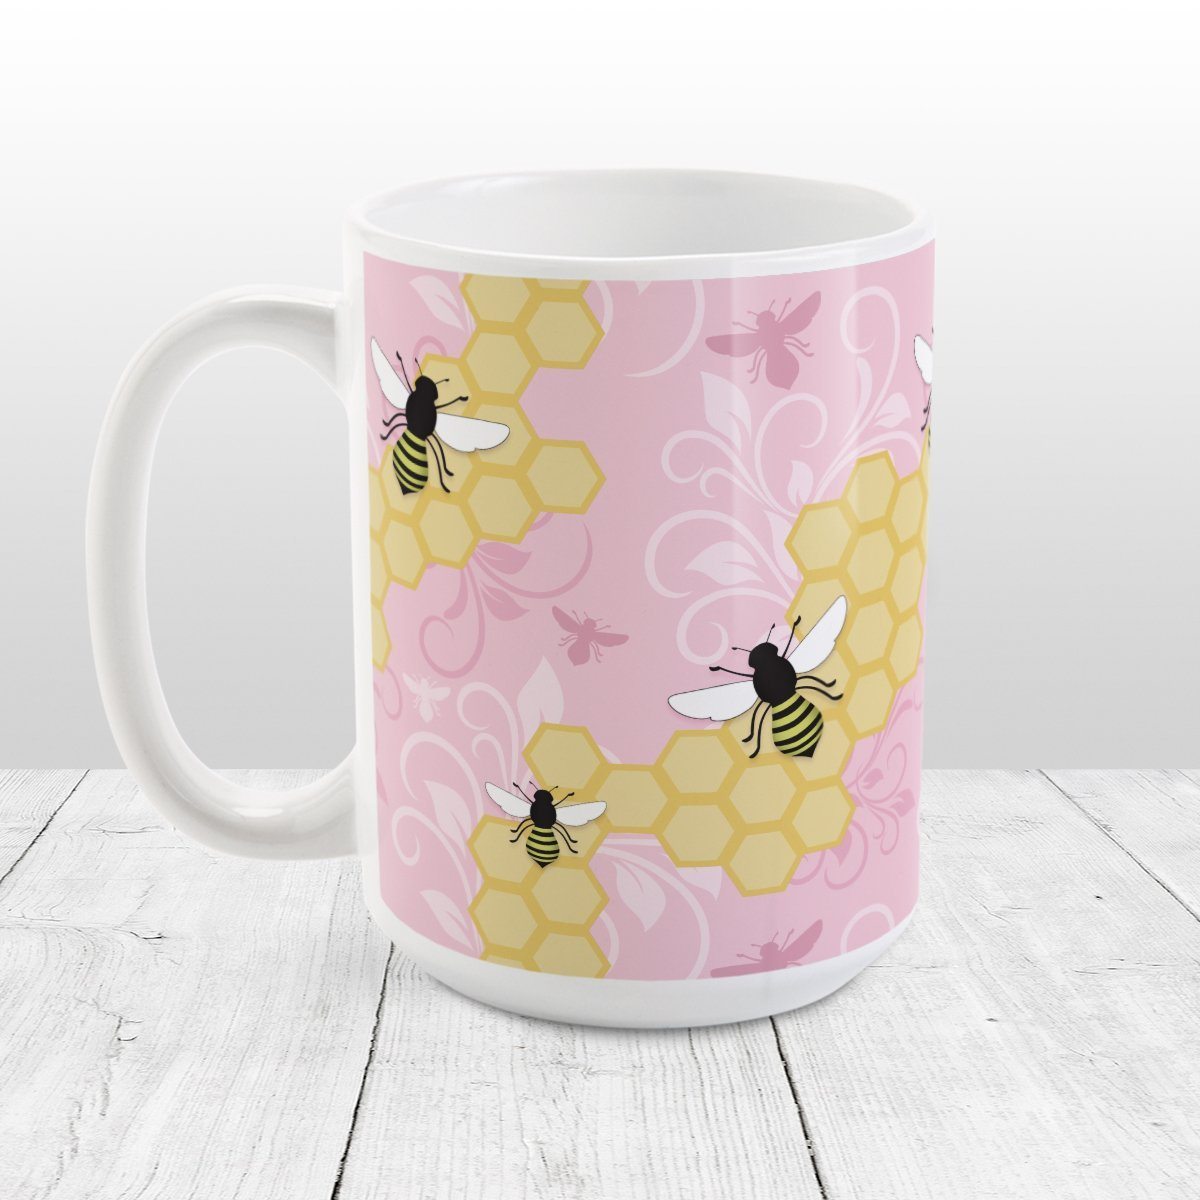 Pink Honeycomb Bee Mug at Amy's Coffee Mugs. A ceramic coffee mug designed with a pattern of black and yellow bees on honeycomb lines over a pink flourish background that wraps around the mug to the handle.